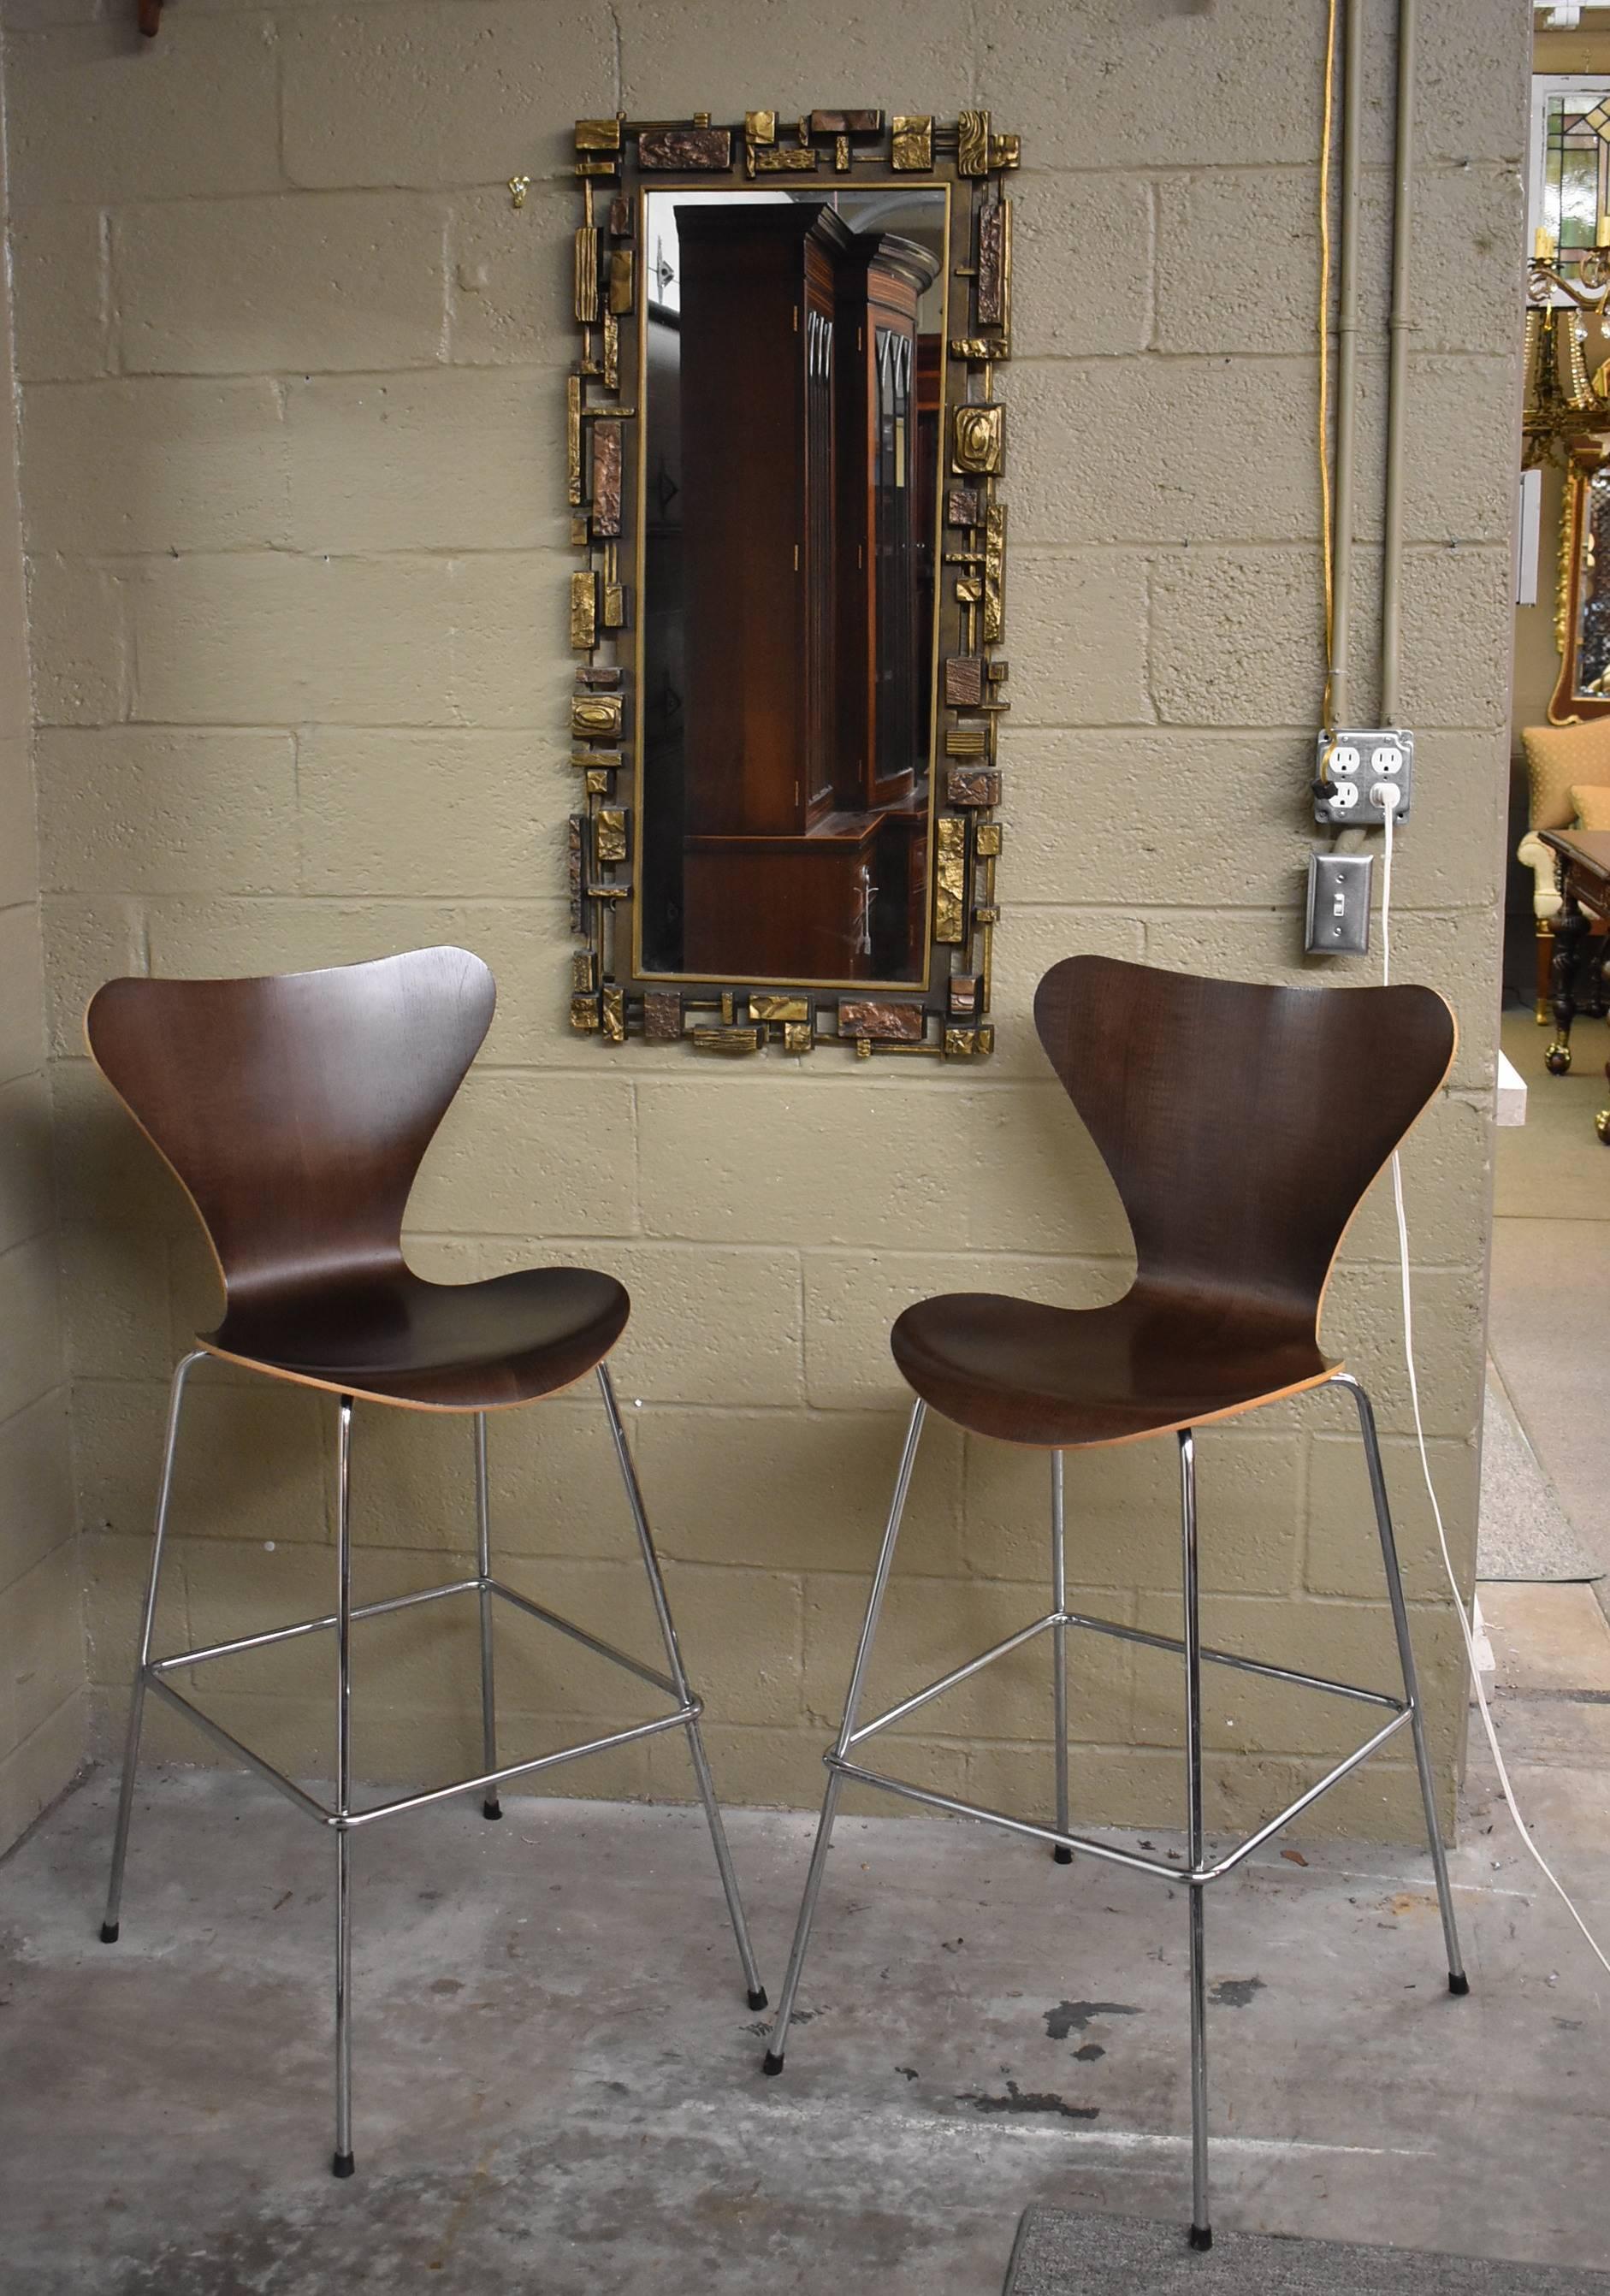 Stunning pair of midcentury Danish modern barstools designed by Arne Jacobsen for Fritz Hansen. They are done in a beautiful rich ebonized bent wood seat and back with a chrome frame. Very sturdy and in very good condition with normal light wear.